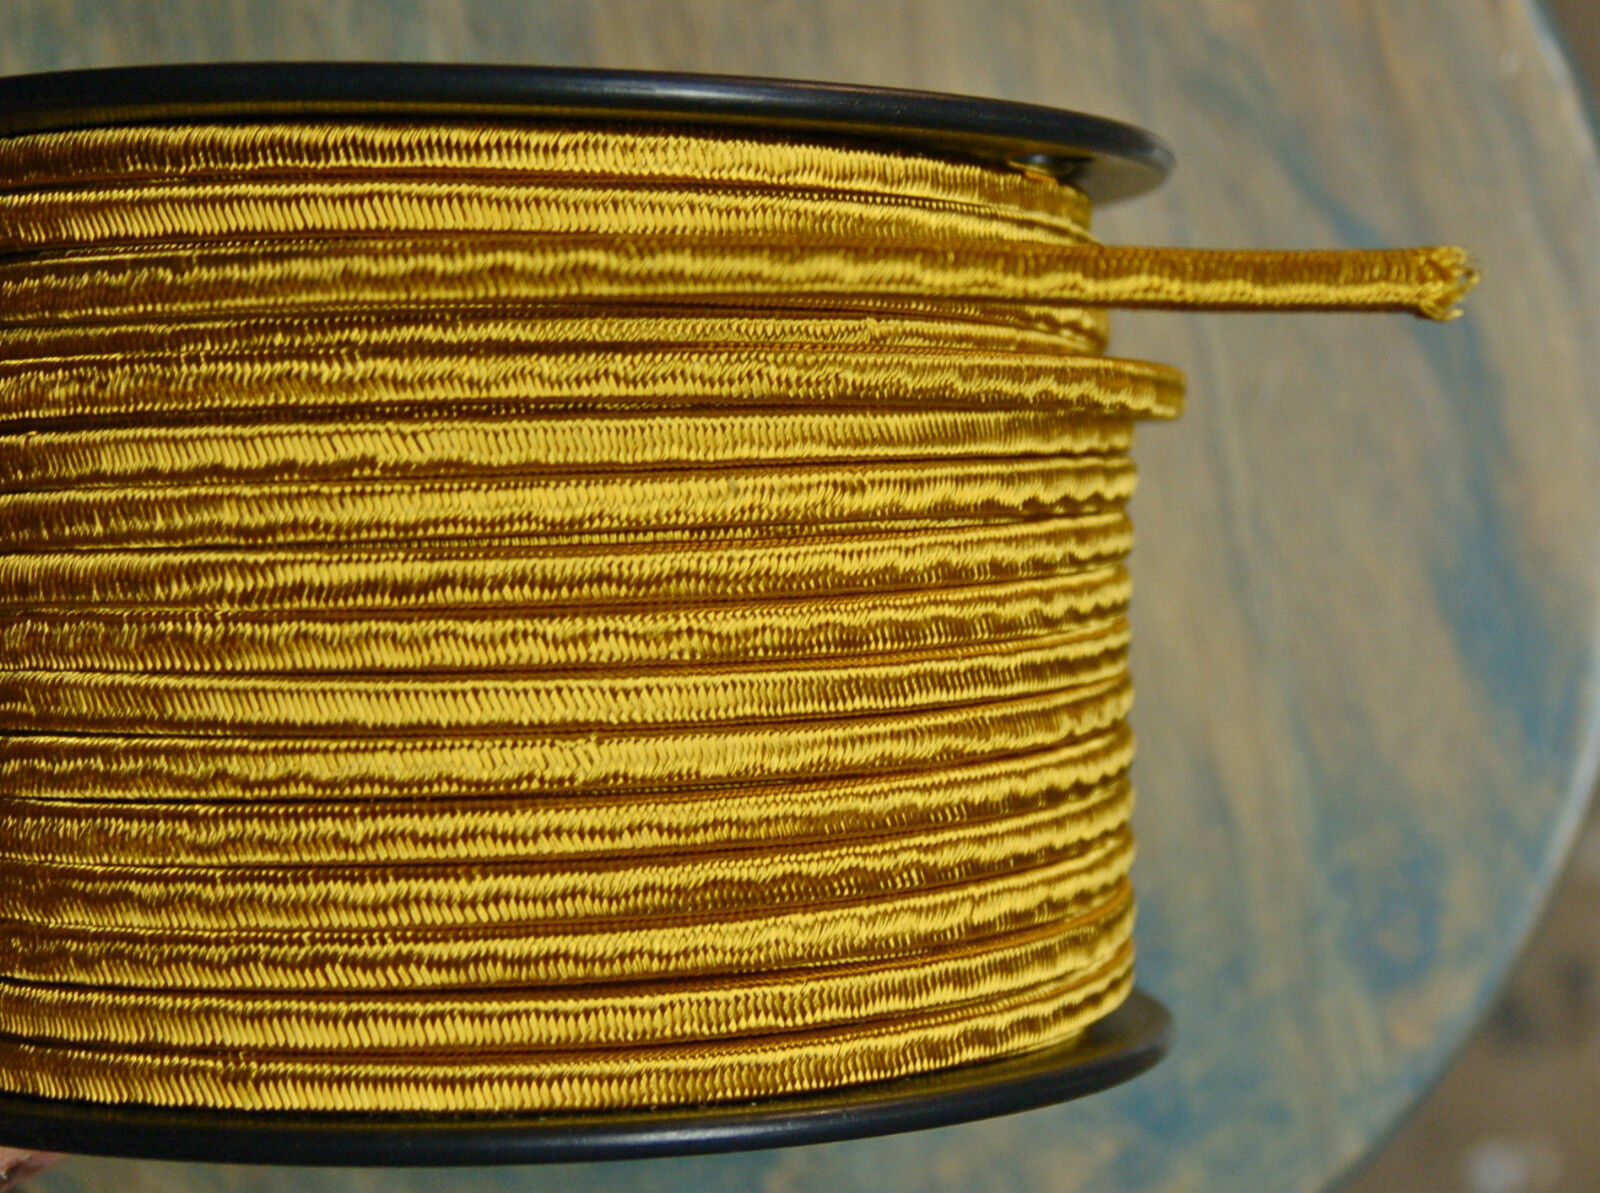 Gold 2-Wire Cloth Covered Cord, 18ga. Vintage Style Lamps, Antique Lights, Rayon